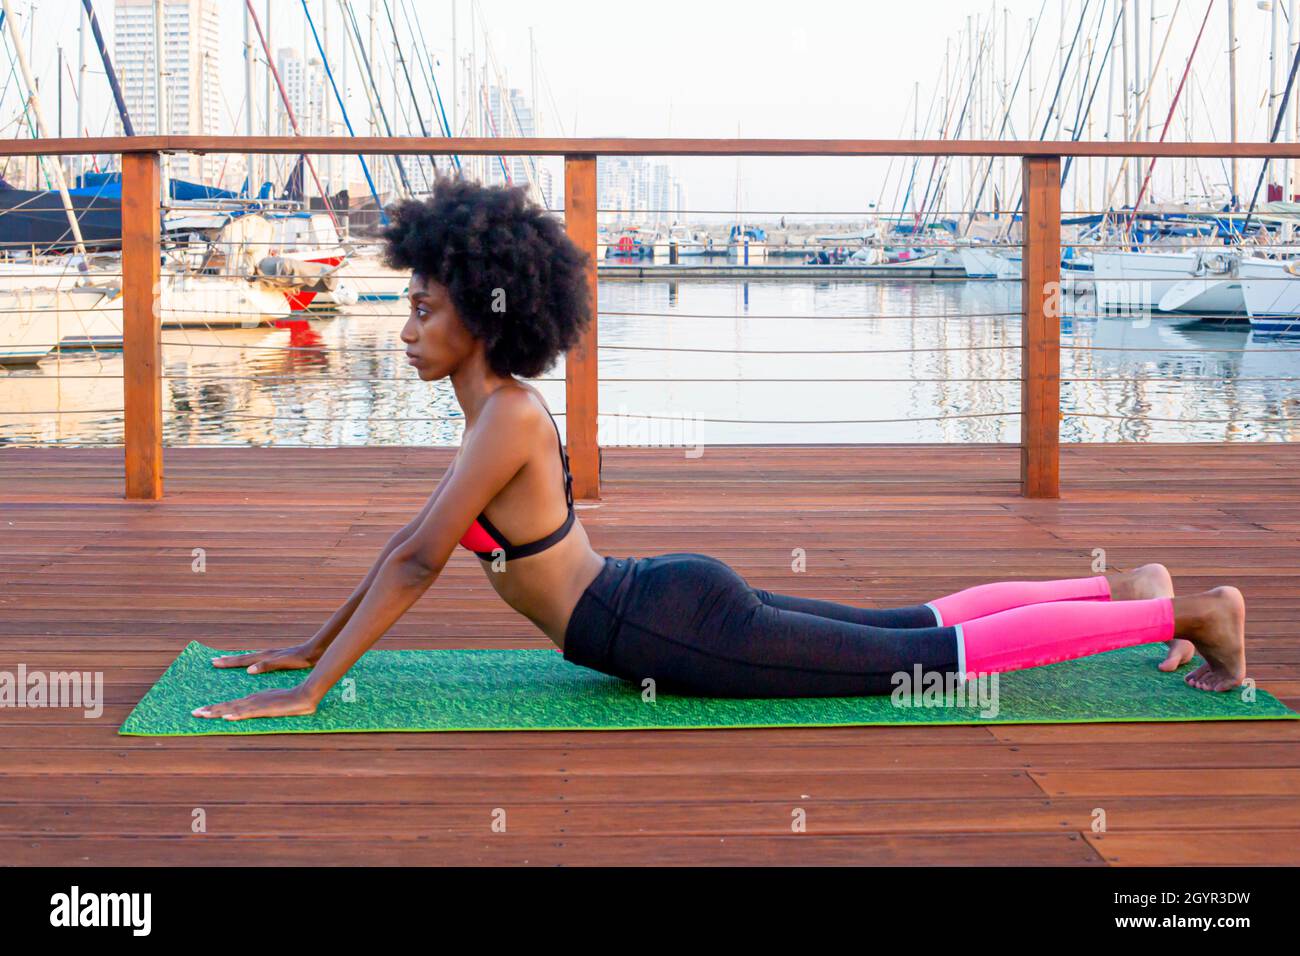 Young athletic woman in sports clothes stretching on a mat on a wooden deck in a marina Stock Photo